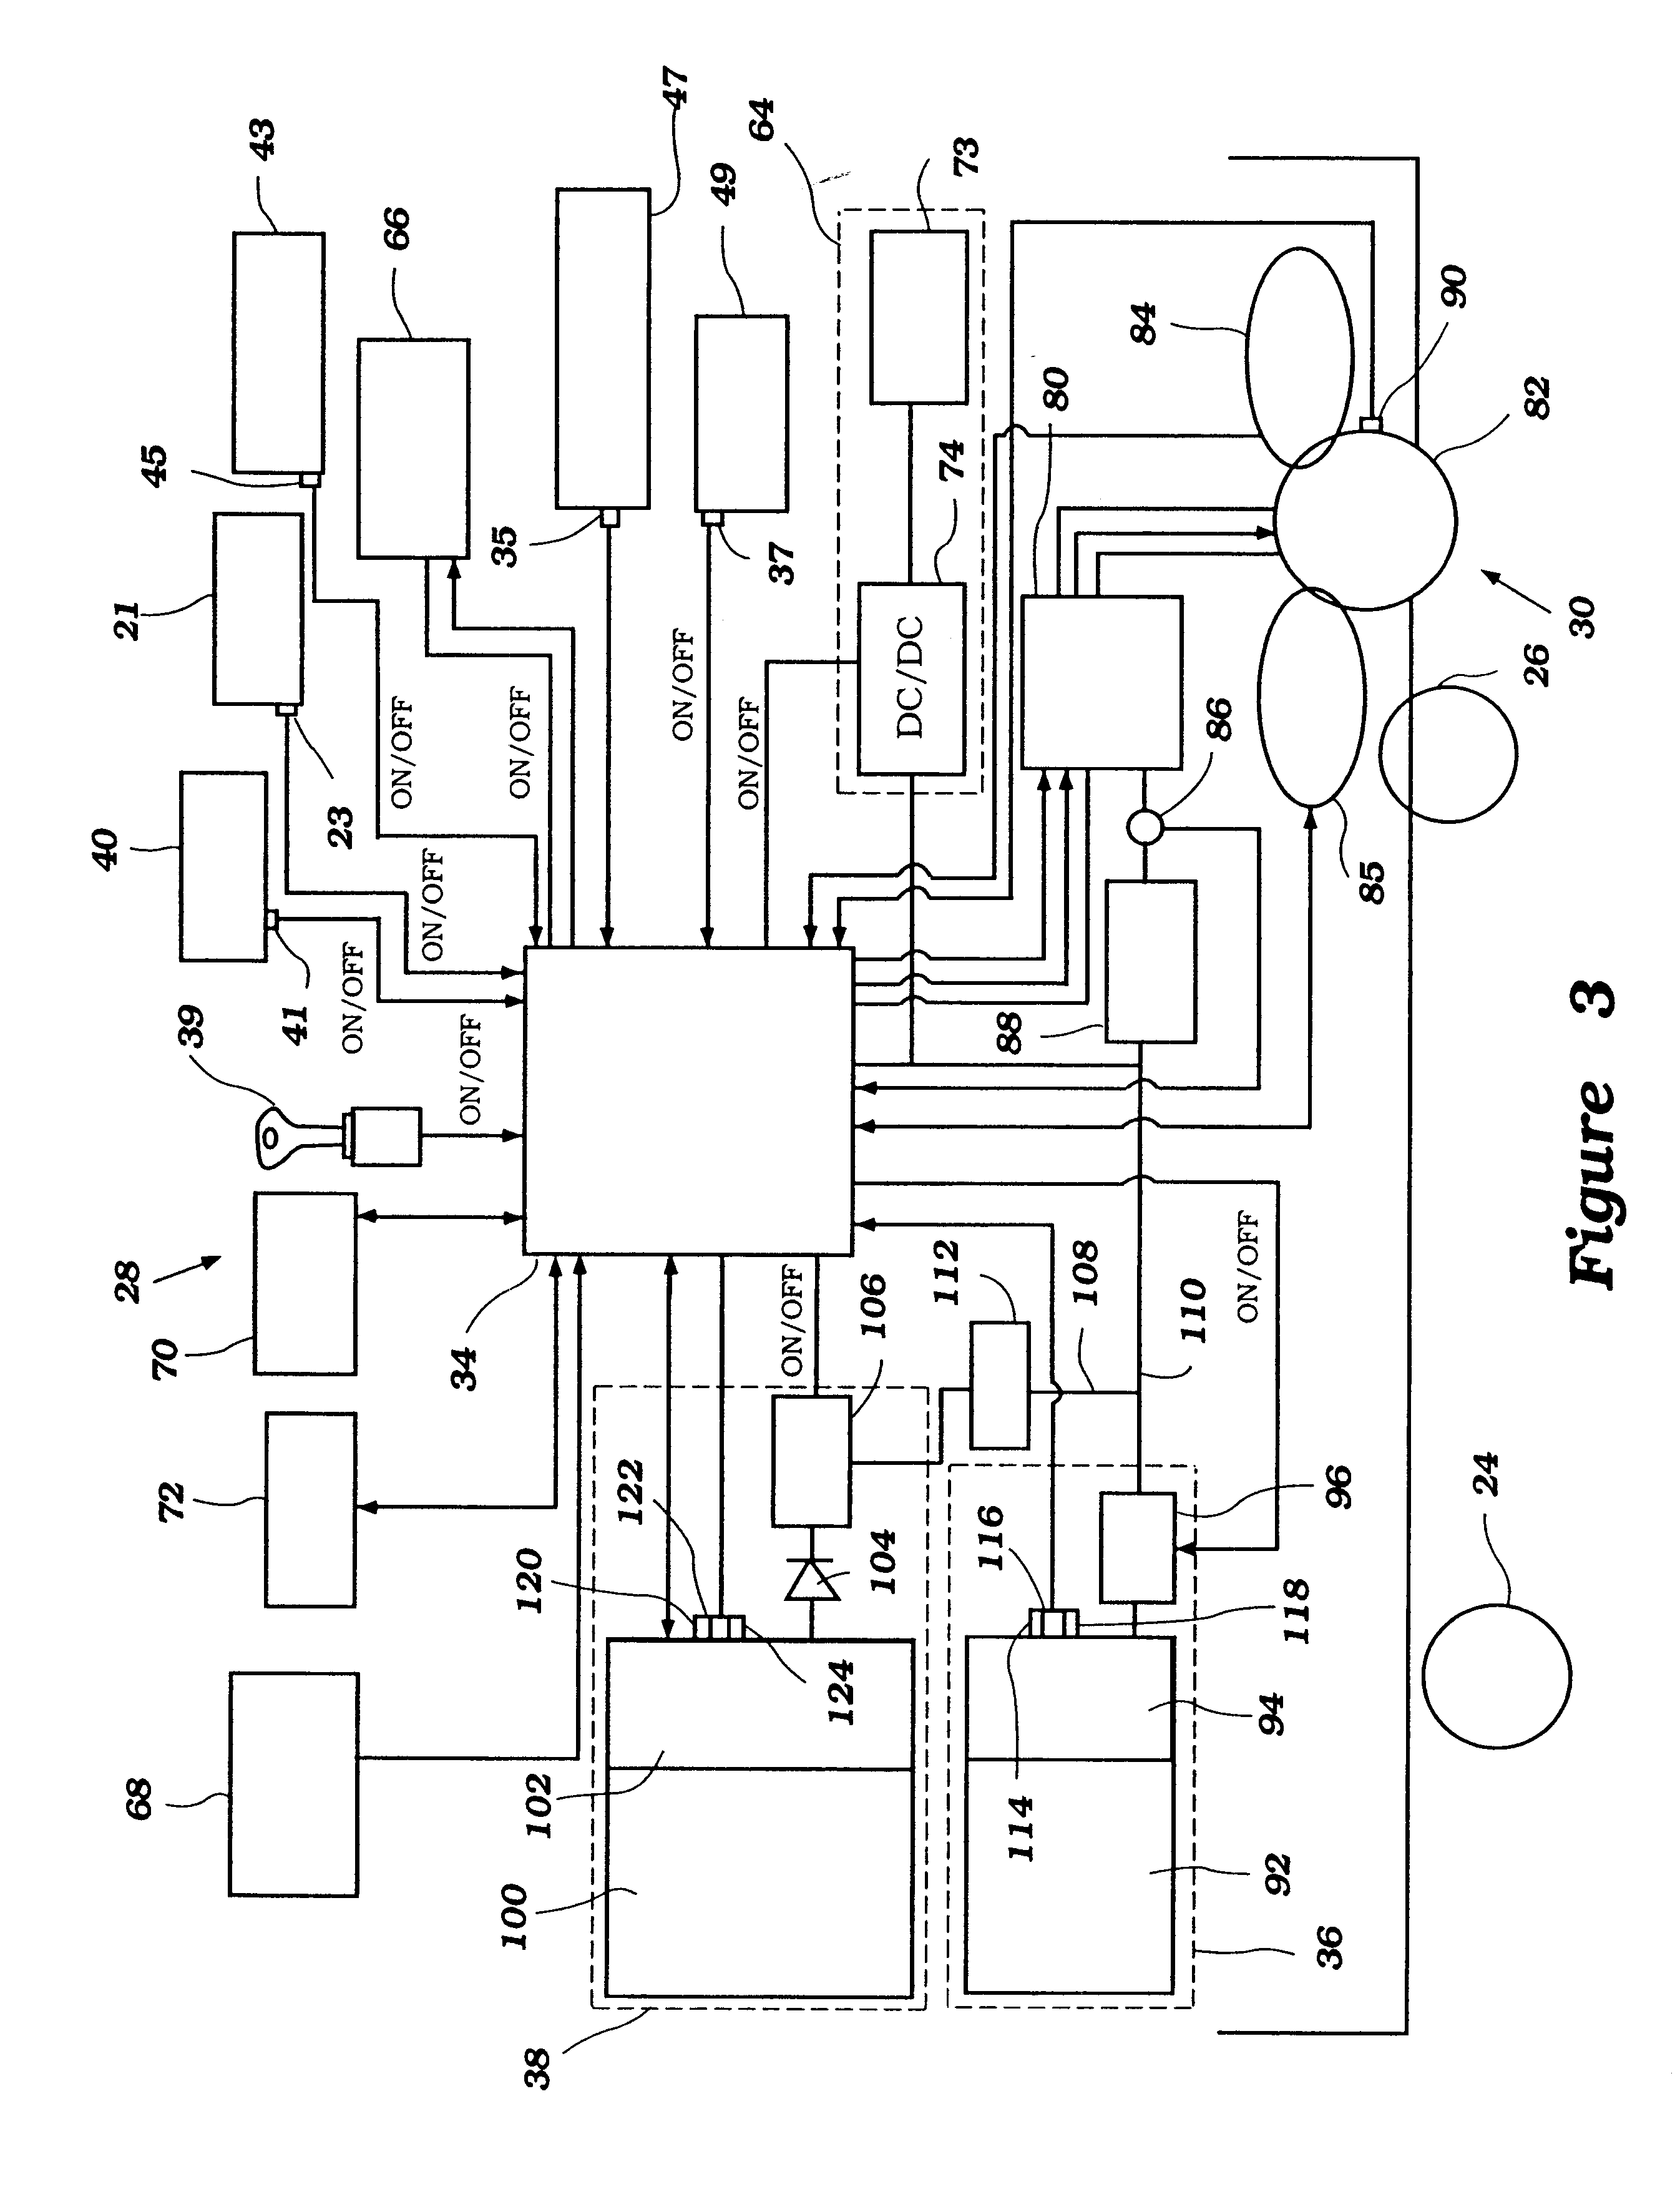 Power source control method for an electric vehicle